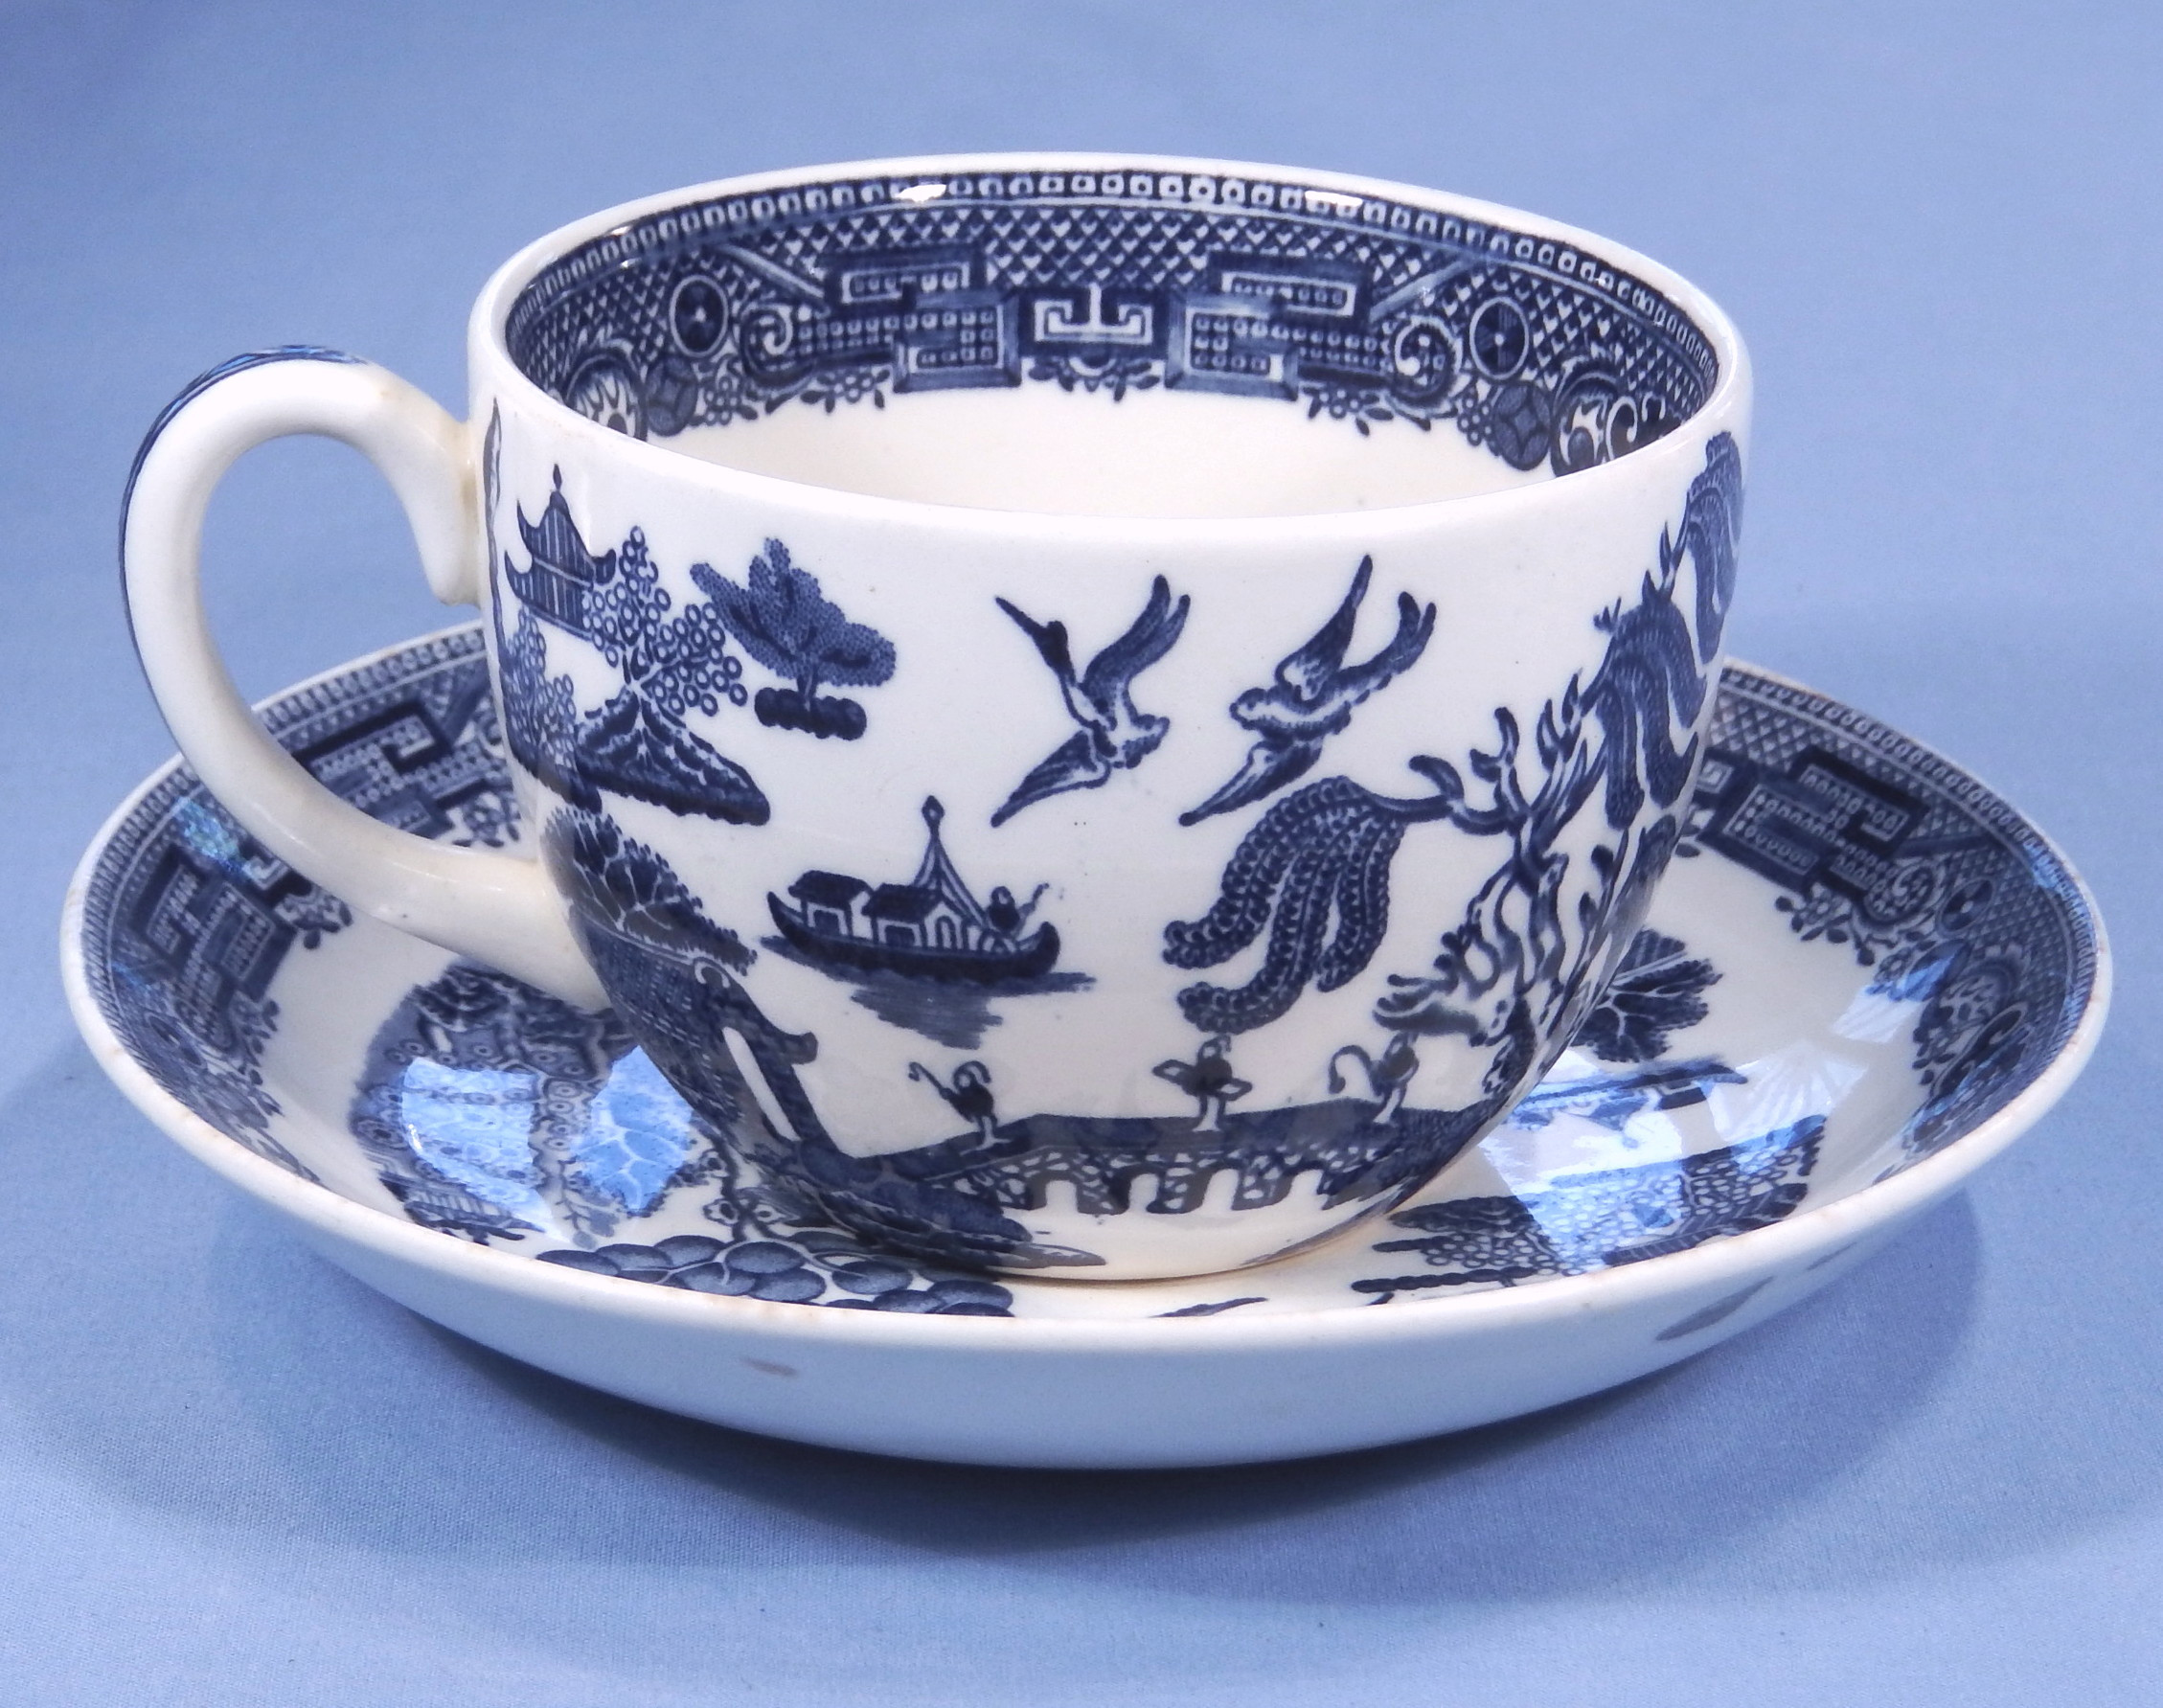 13 Unique noritake Vase Patterns 2024 free download noritake vase patterns of wedgwood willow pattern vintage china tea cup and saucer throughout wedgwood willow pattern vintage china tea cup and saucer